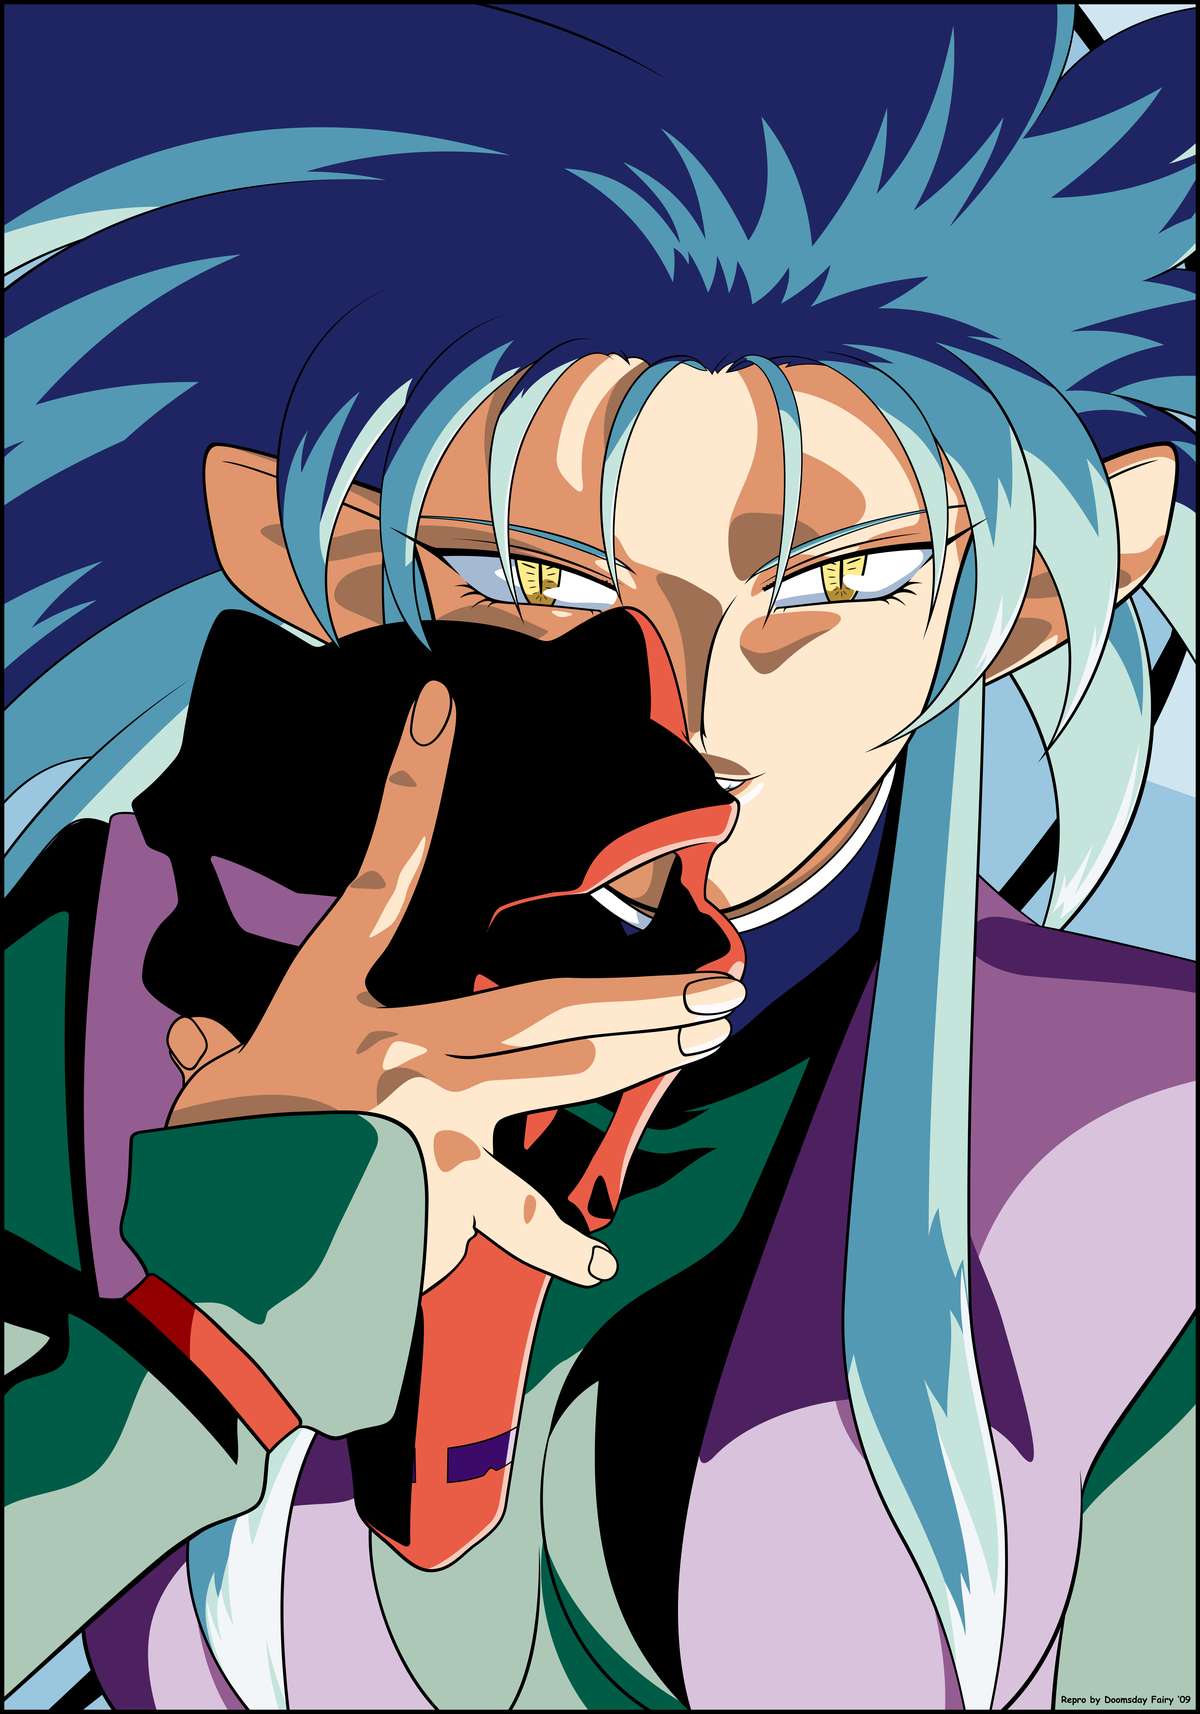 Explore the colorful characters of Tenchi Muyo